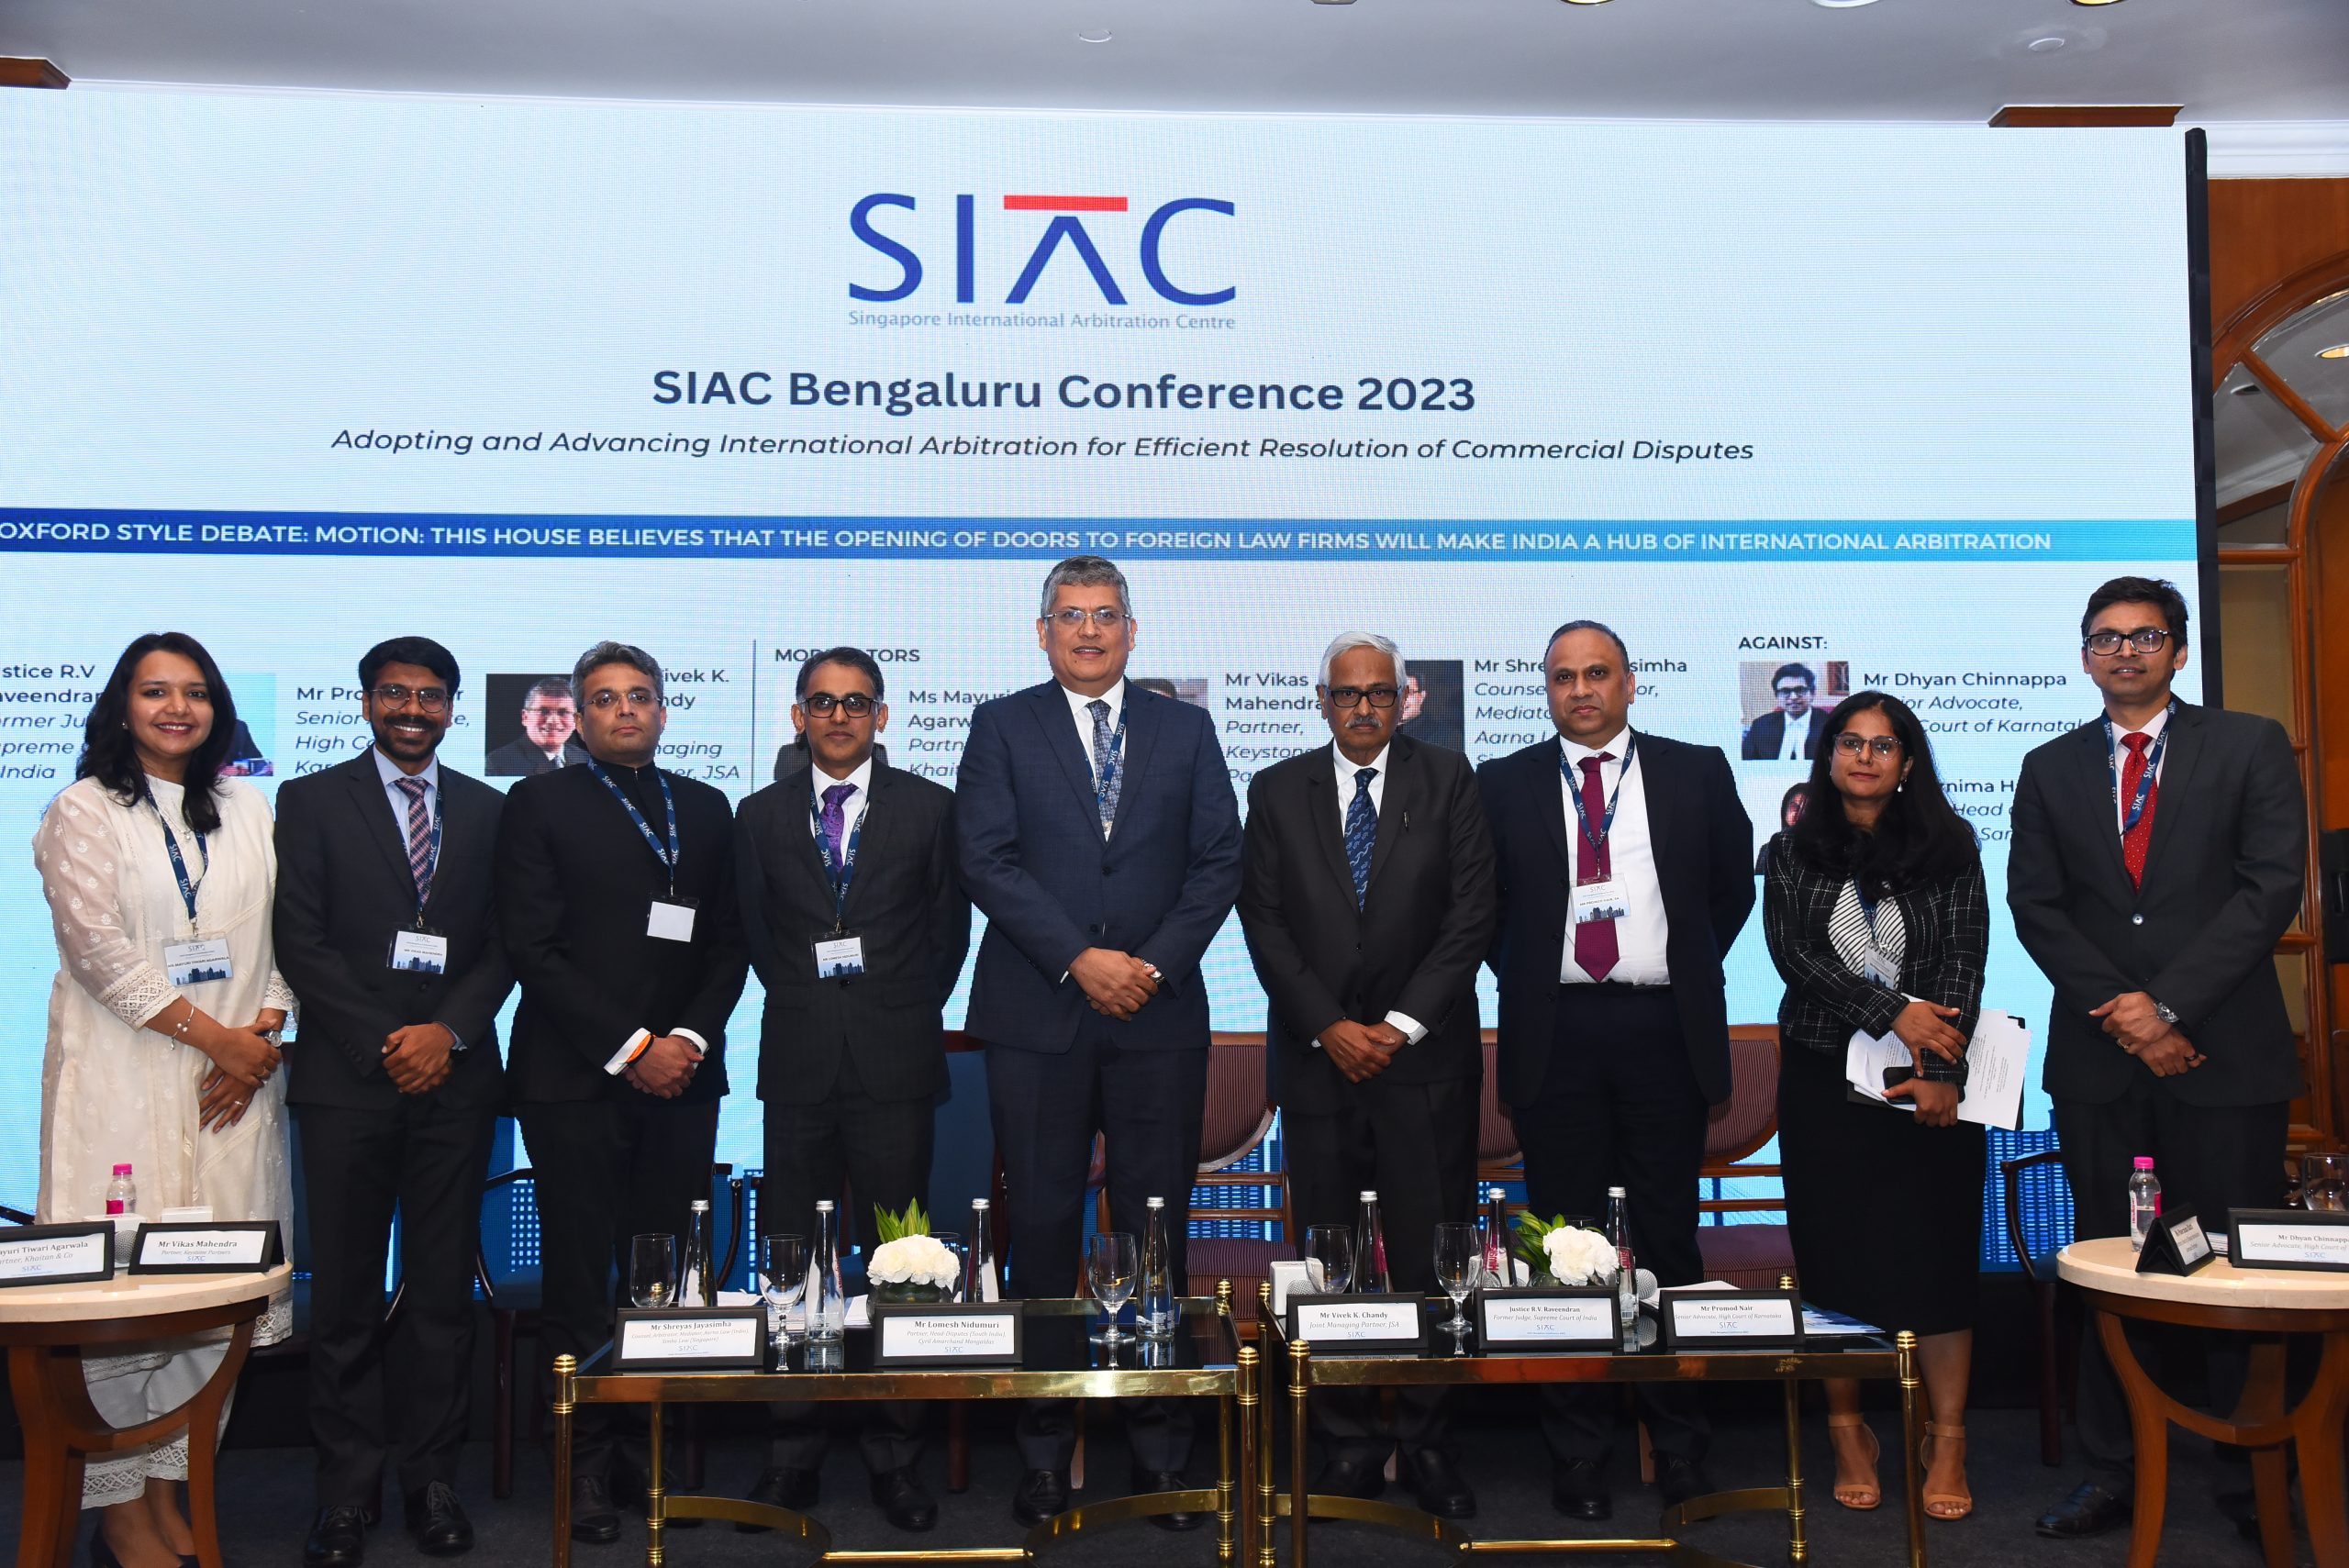 Aarna Law participates in the SIAC Bengaluru Conference 2023